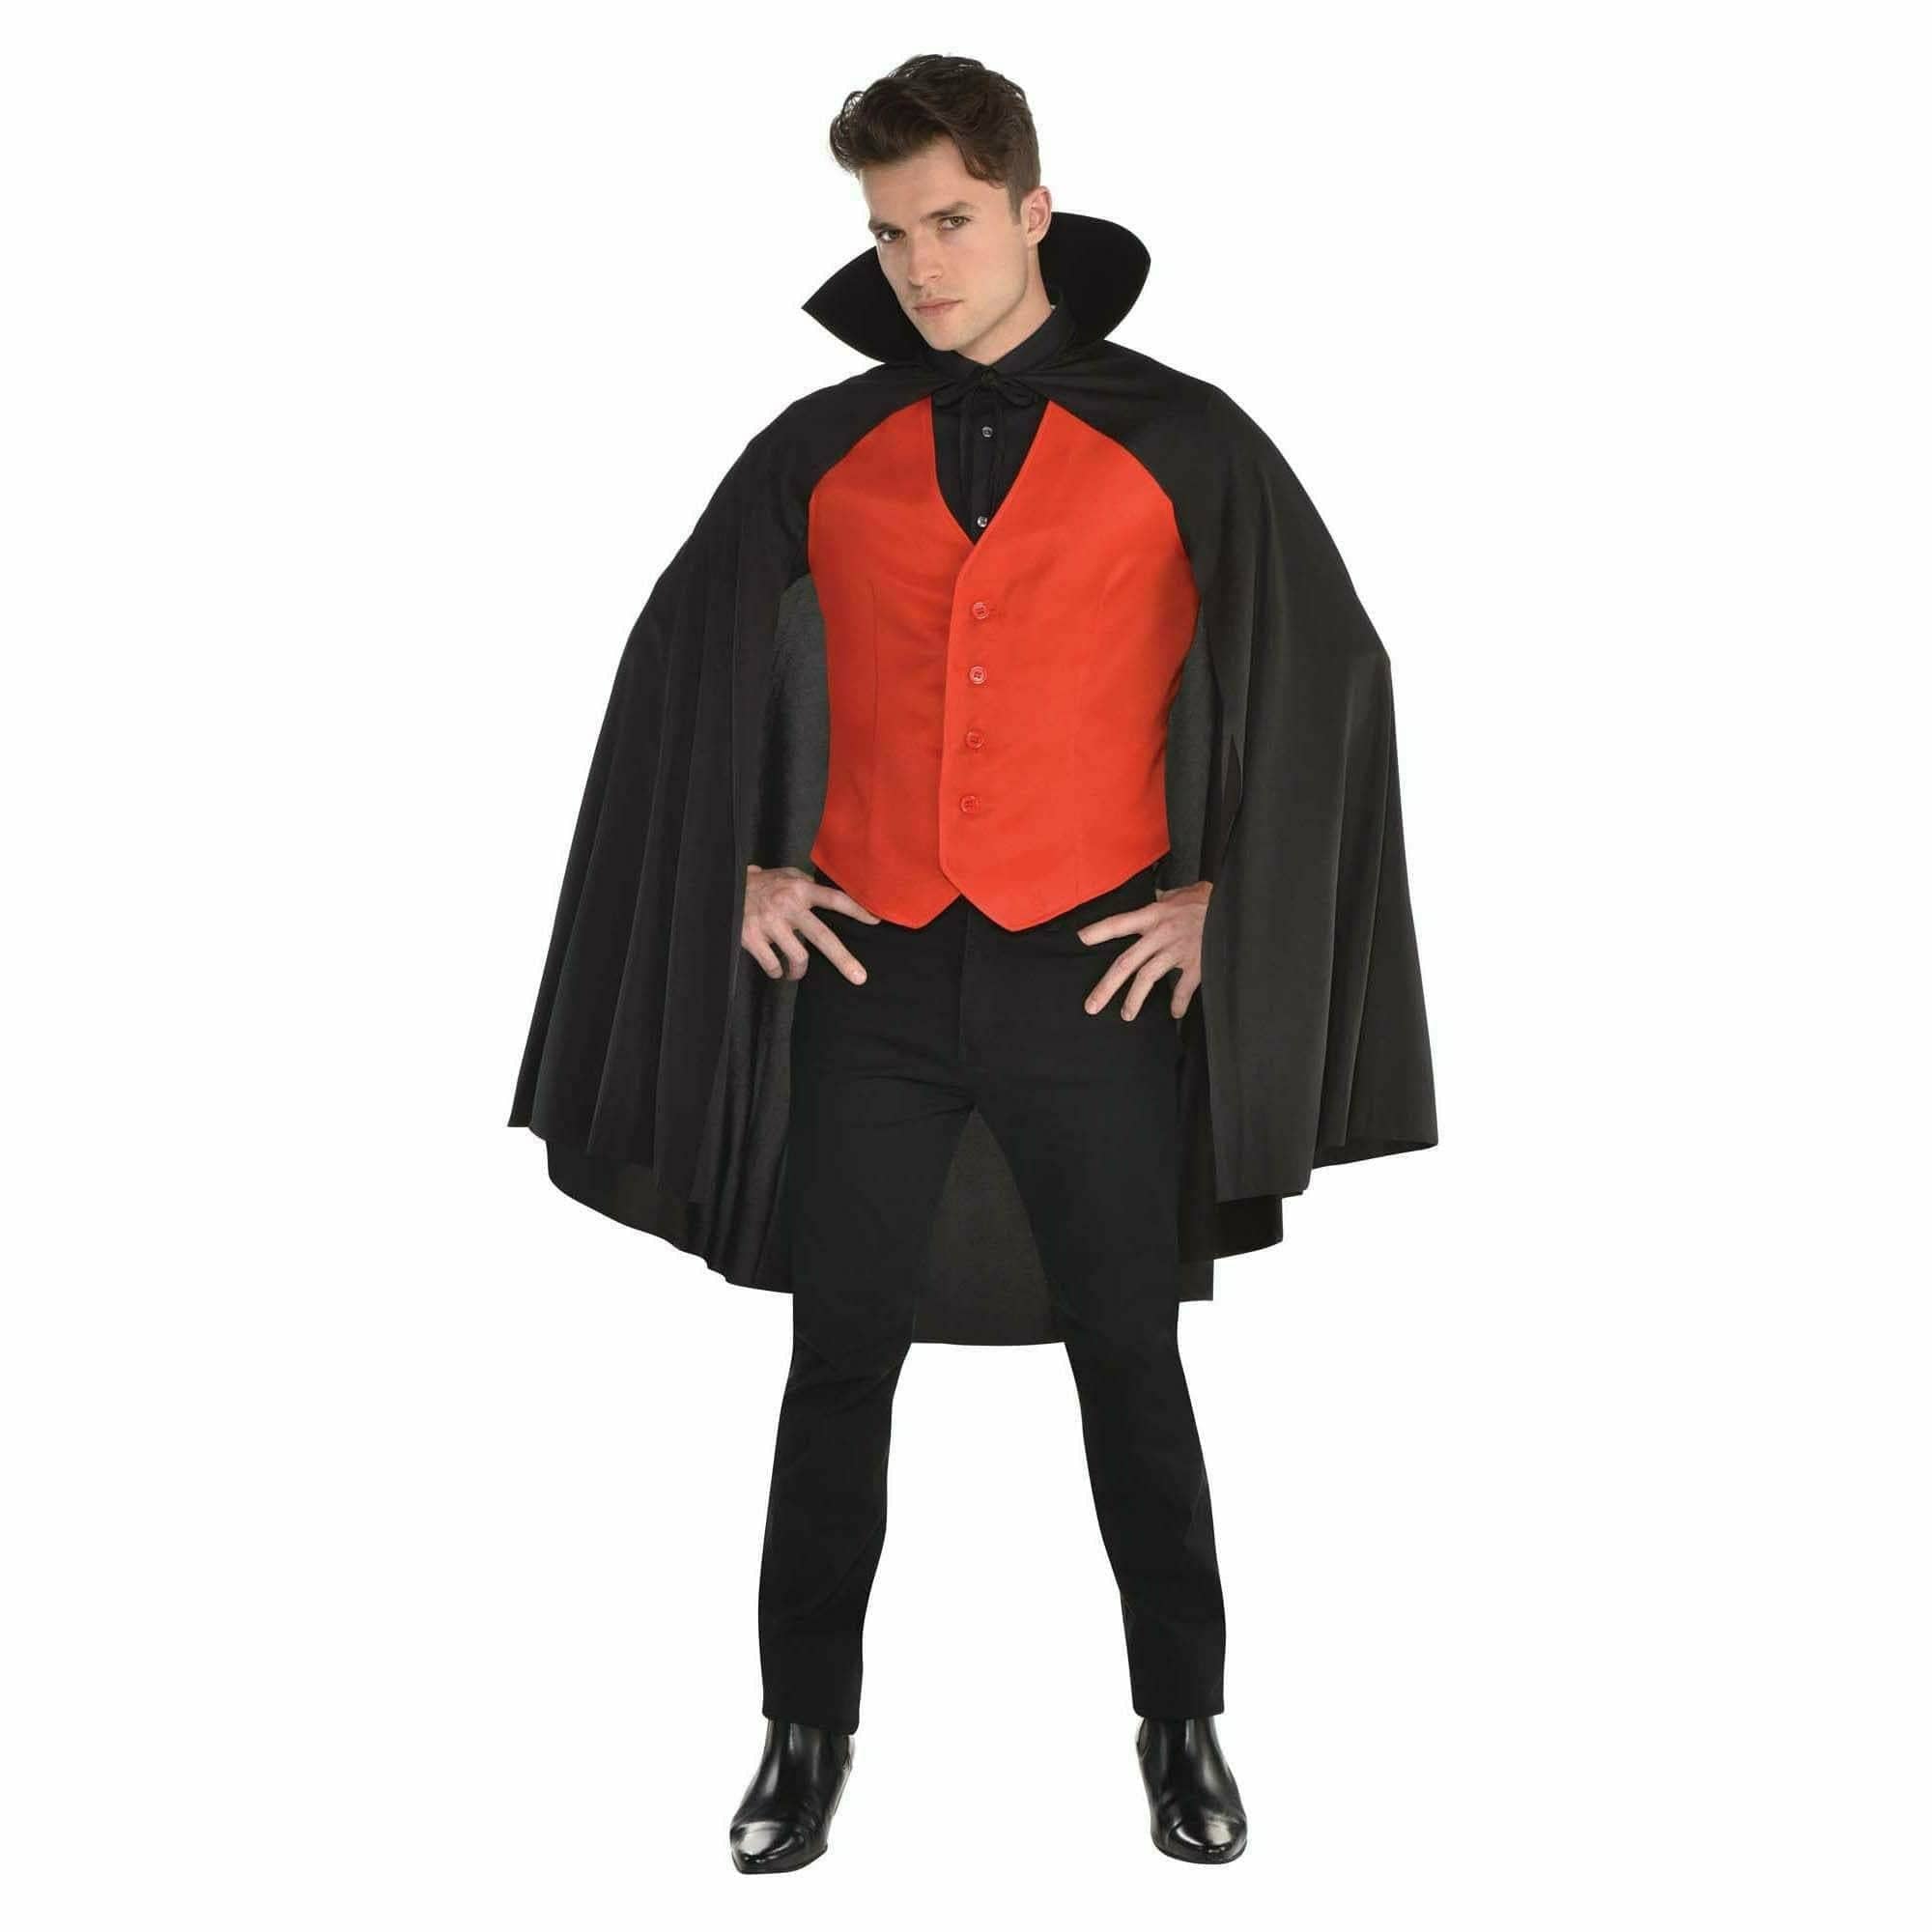 Amscan COSTUMES: ACCESSORIES Red Vest - Adult Standard